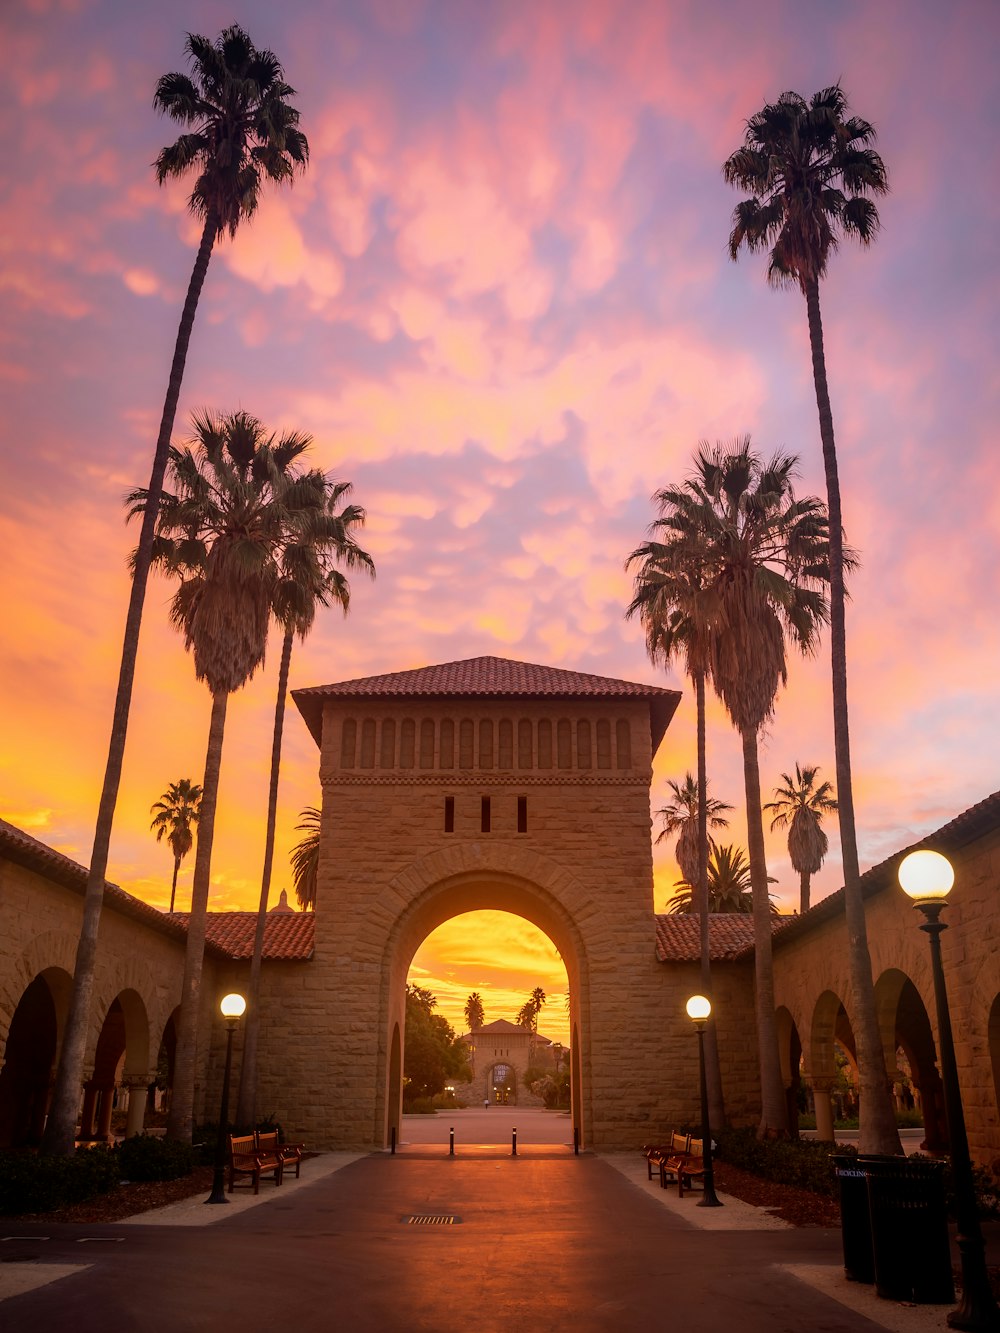 palm trees line the walkway leading to a beautiful sunset